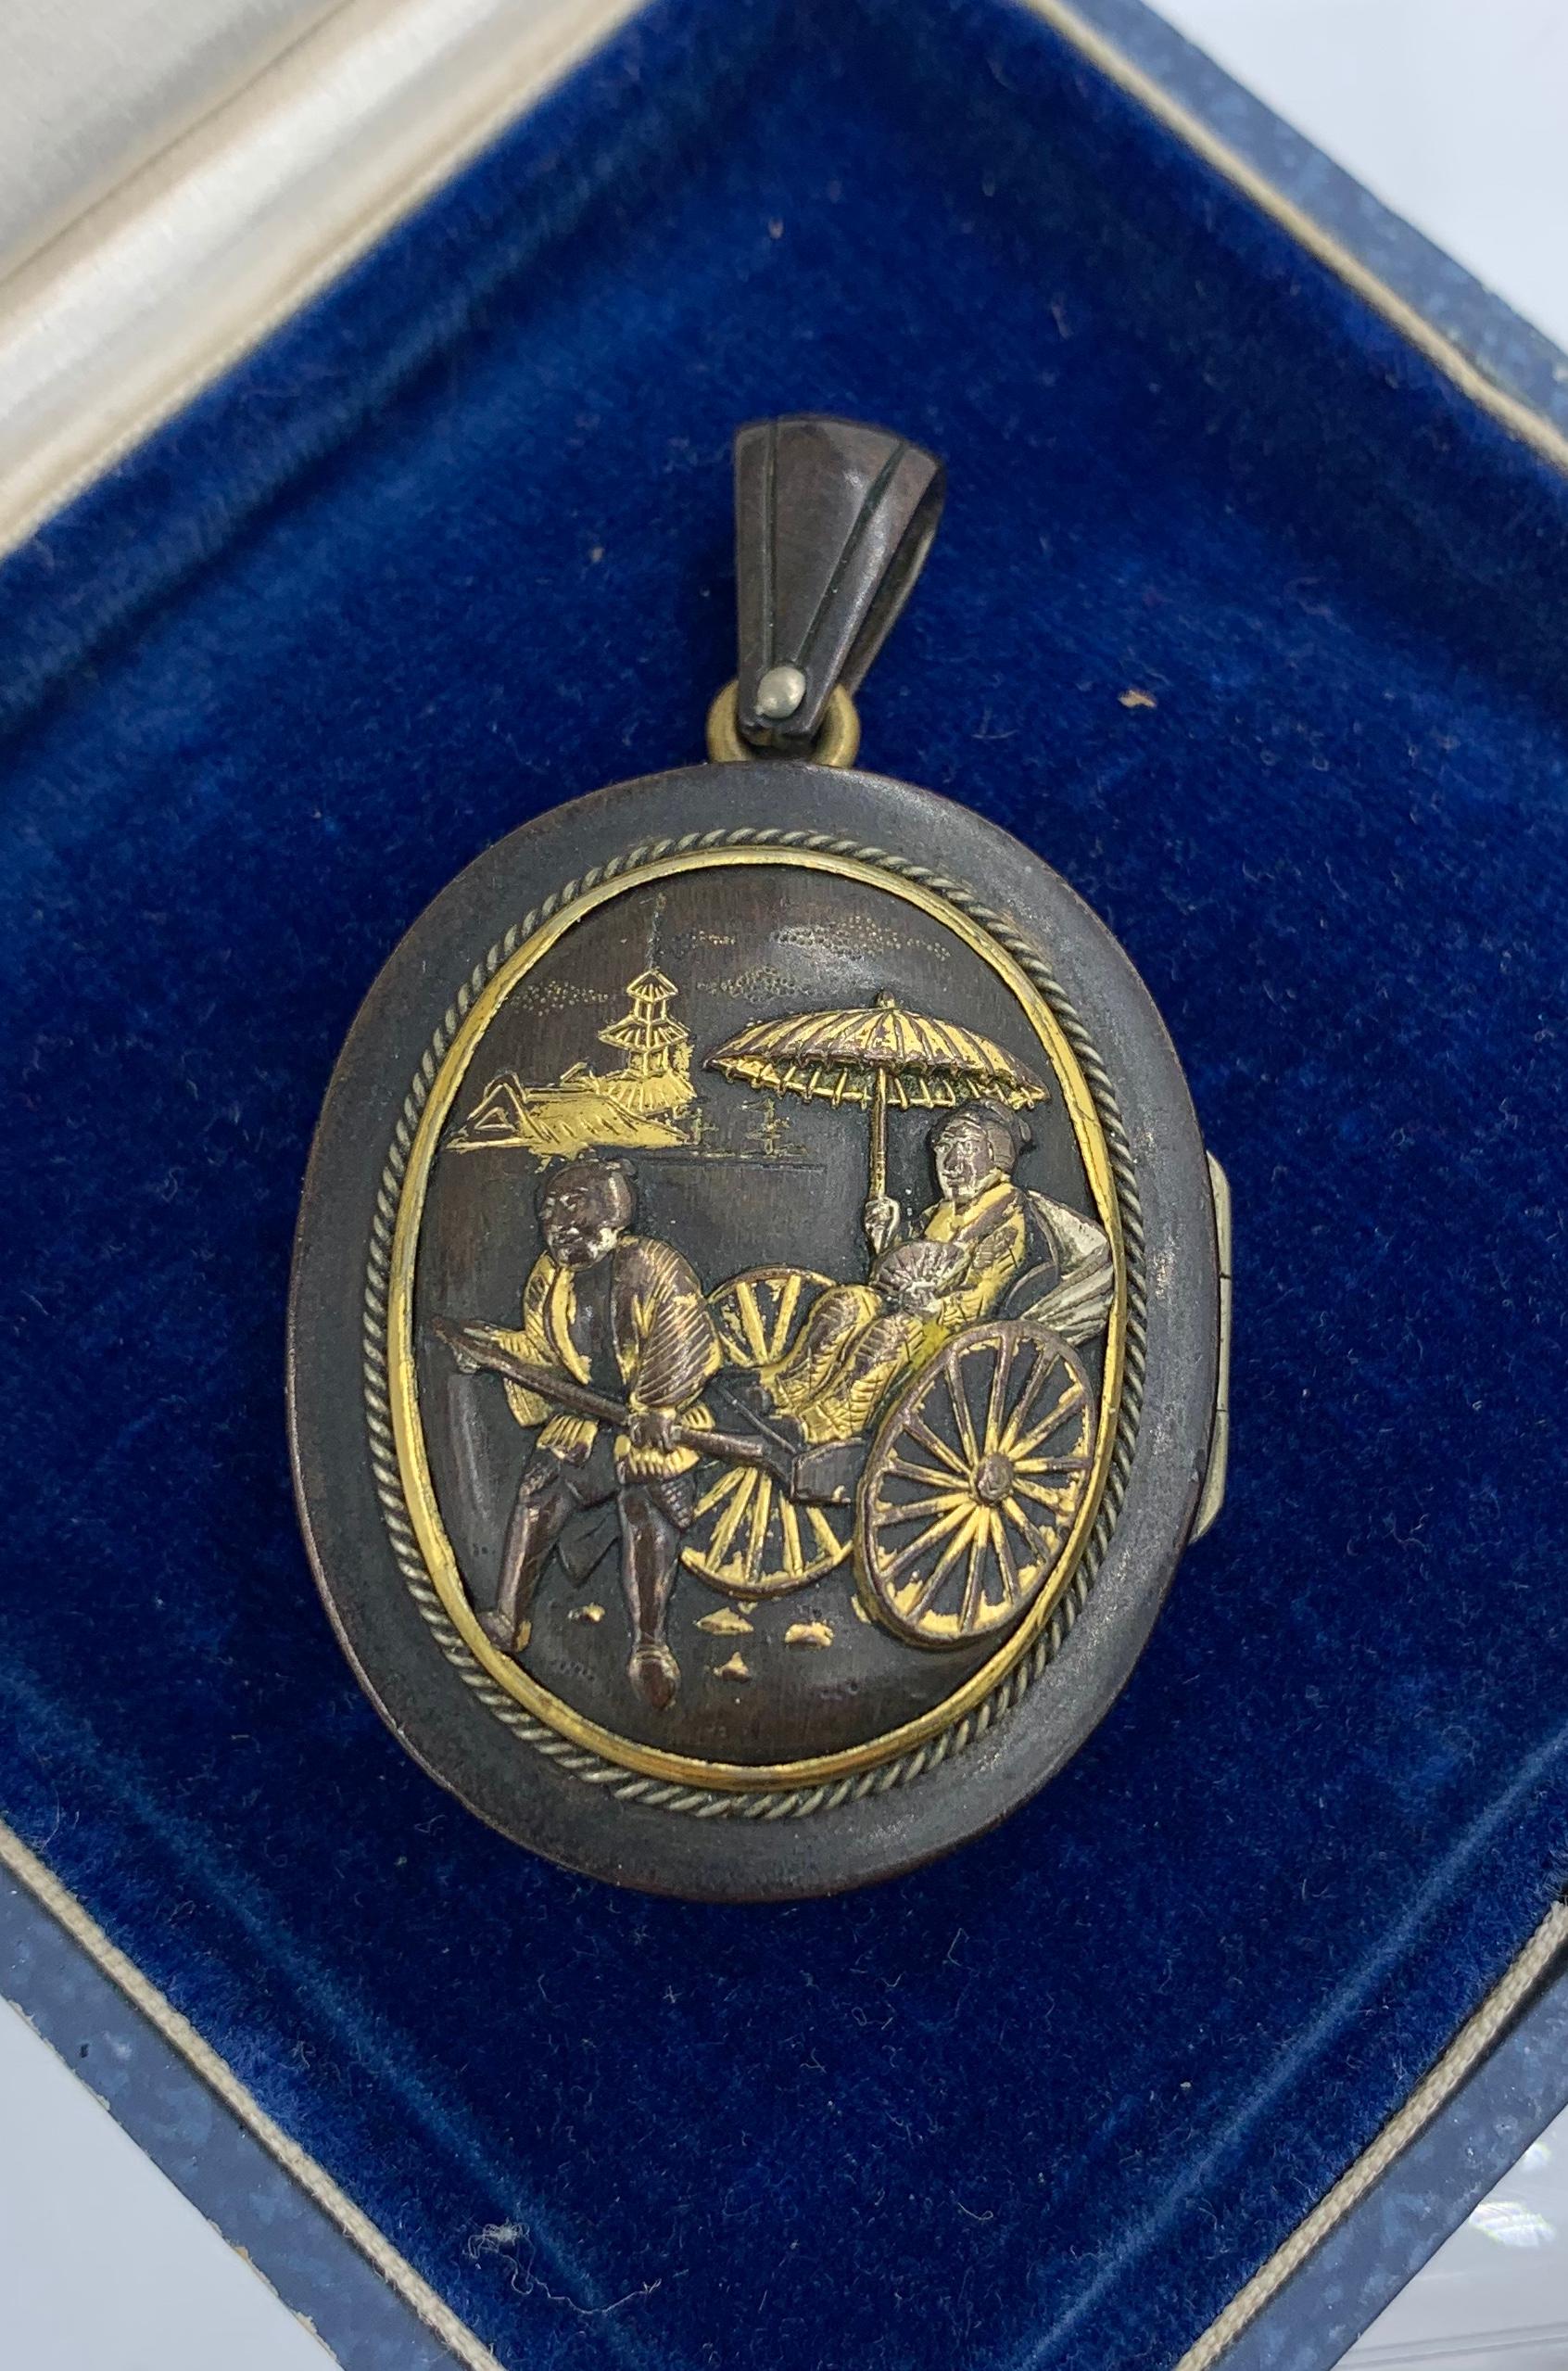 Here we have a very rare Japanese Shakudo Locket Pendant with images of a bird or quail in a forest with Mount Fuji in the background on one side and a woman riding in a rickshaw passing a temple on the other side.  The locket is a stunning example